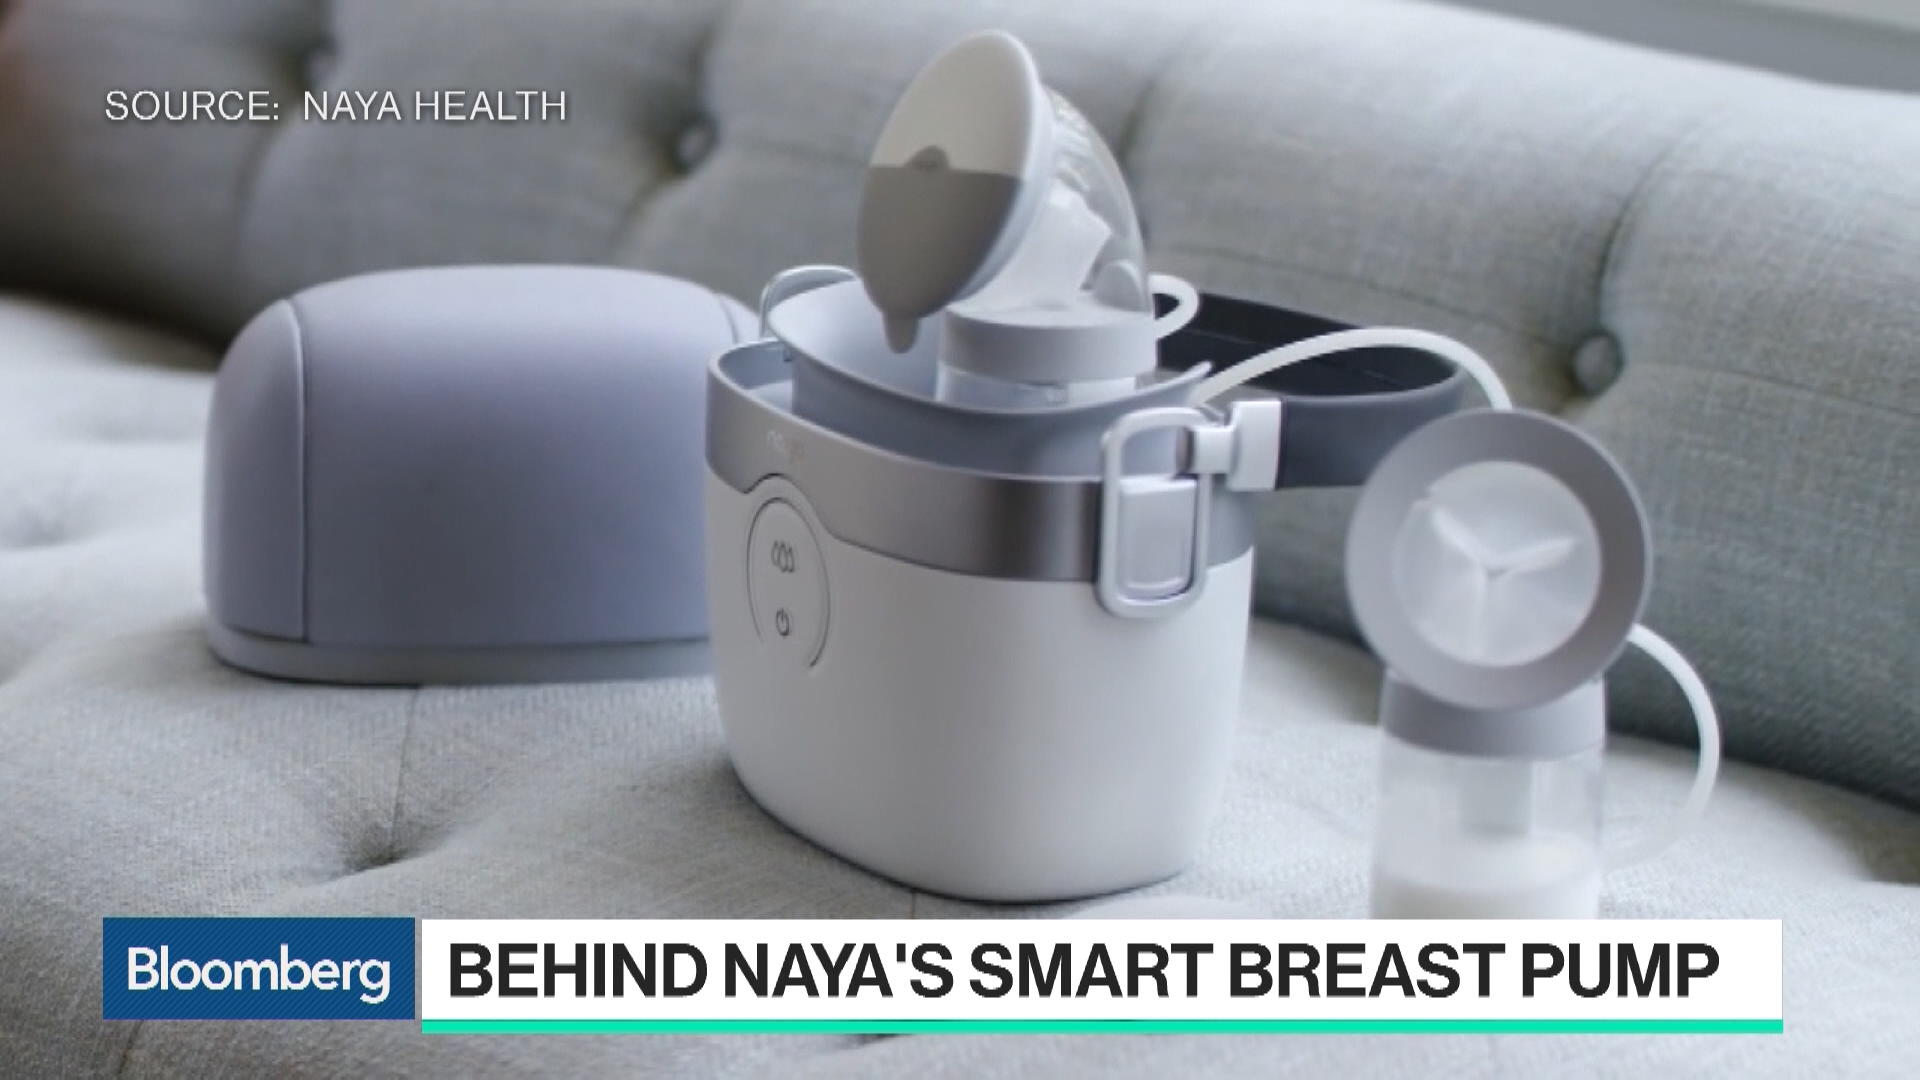 A Smart Breast Pump: Mothers Love It. VCs Don't - Bloomberg